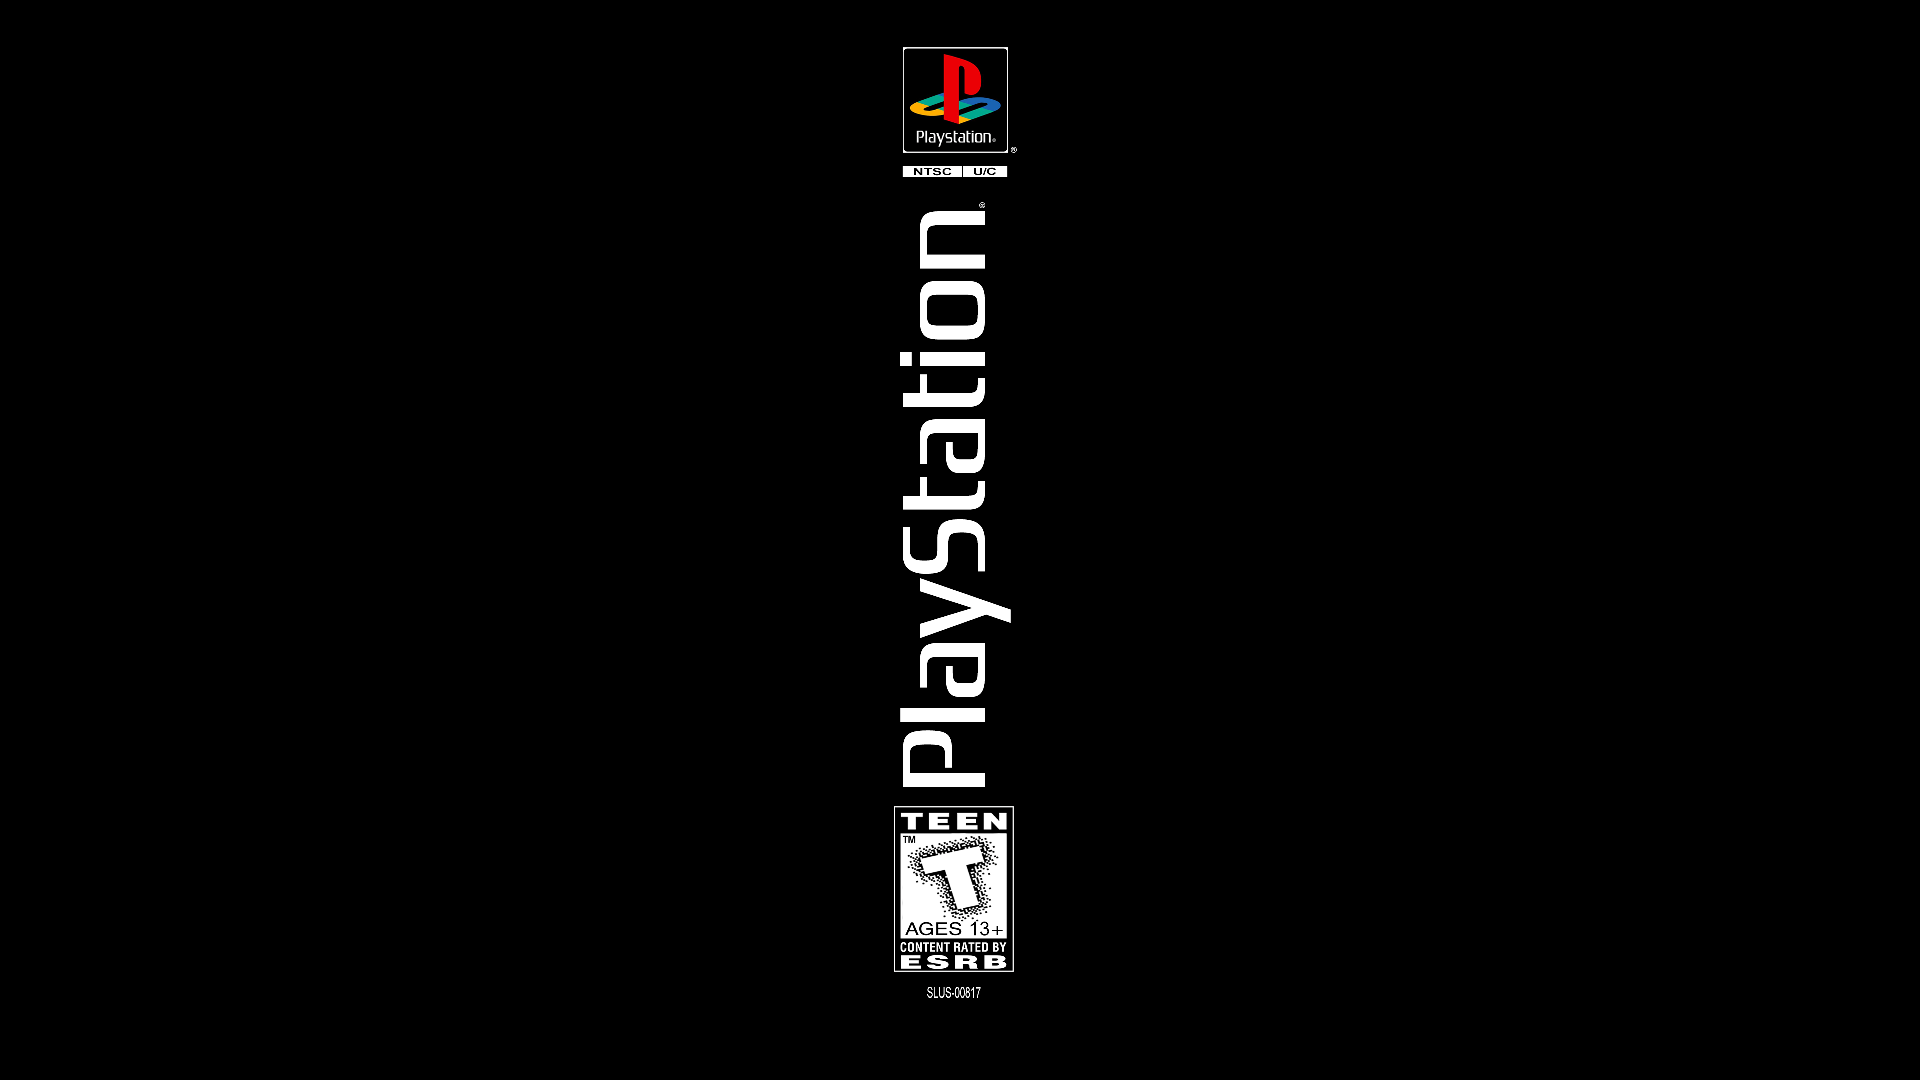 Image PS1 cover wallpapers : PS4.